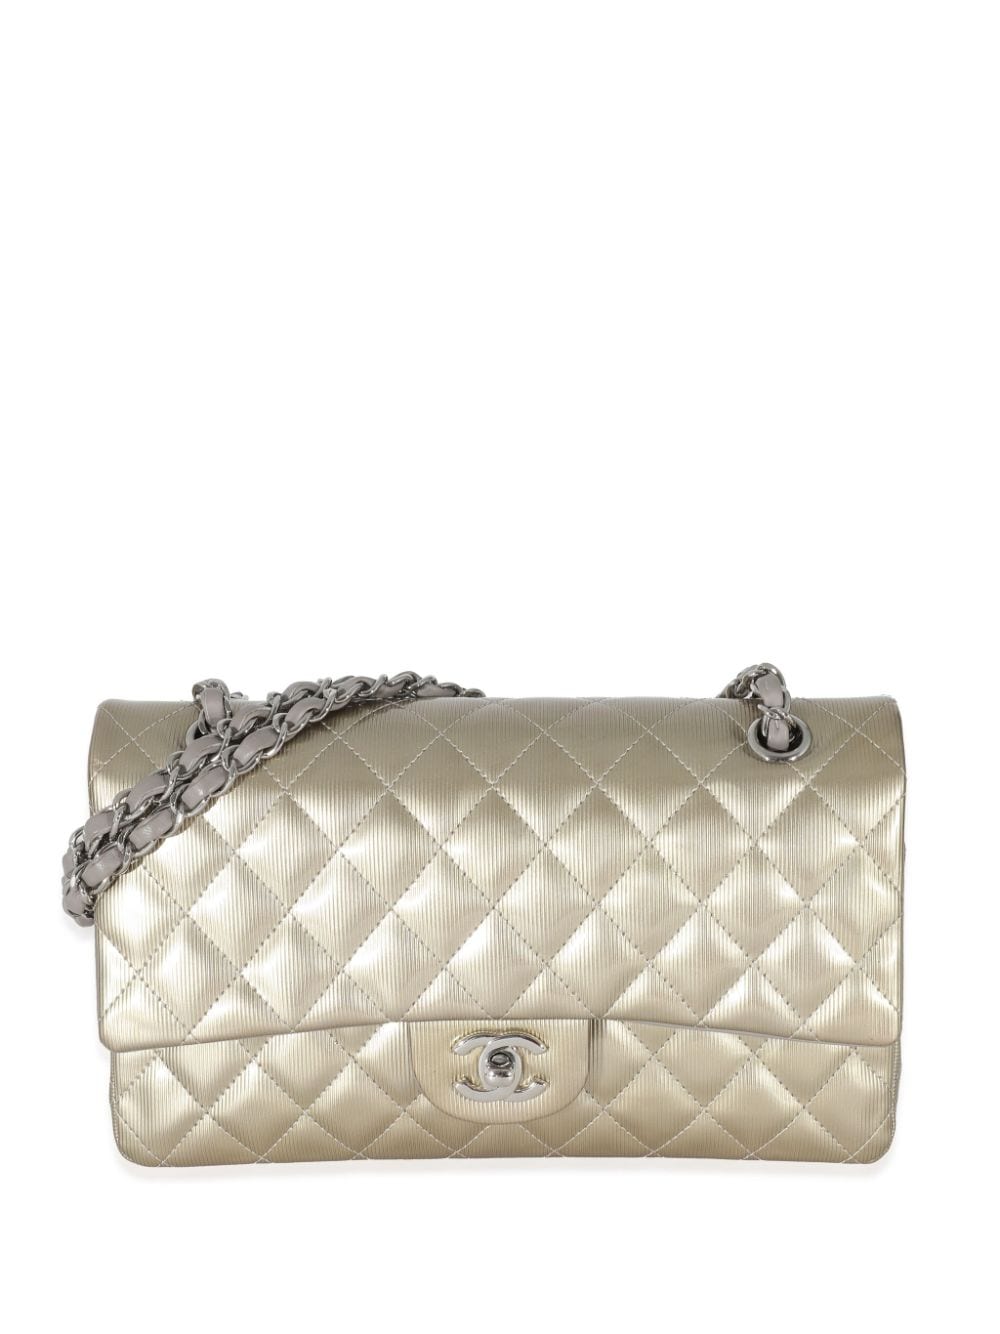 Pre-owned Chanel 2012 Medium Classic Flap Shoulder Bag In Gold